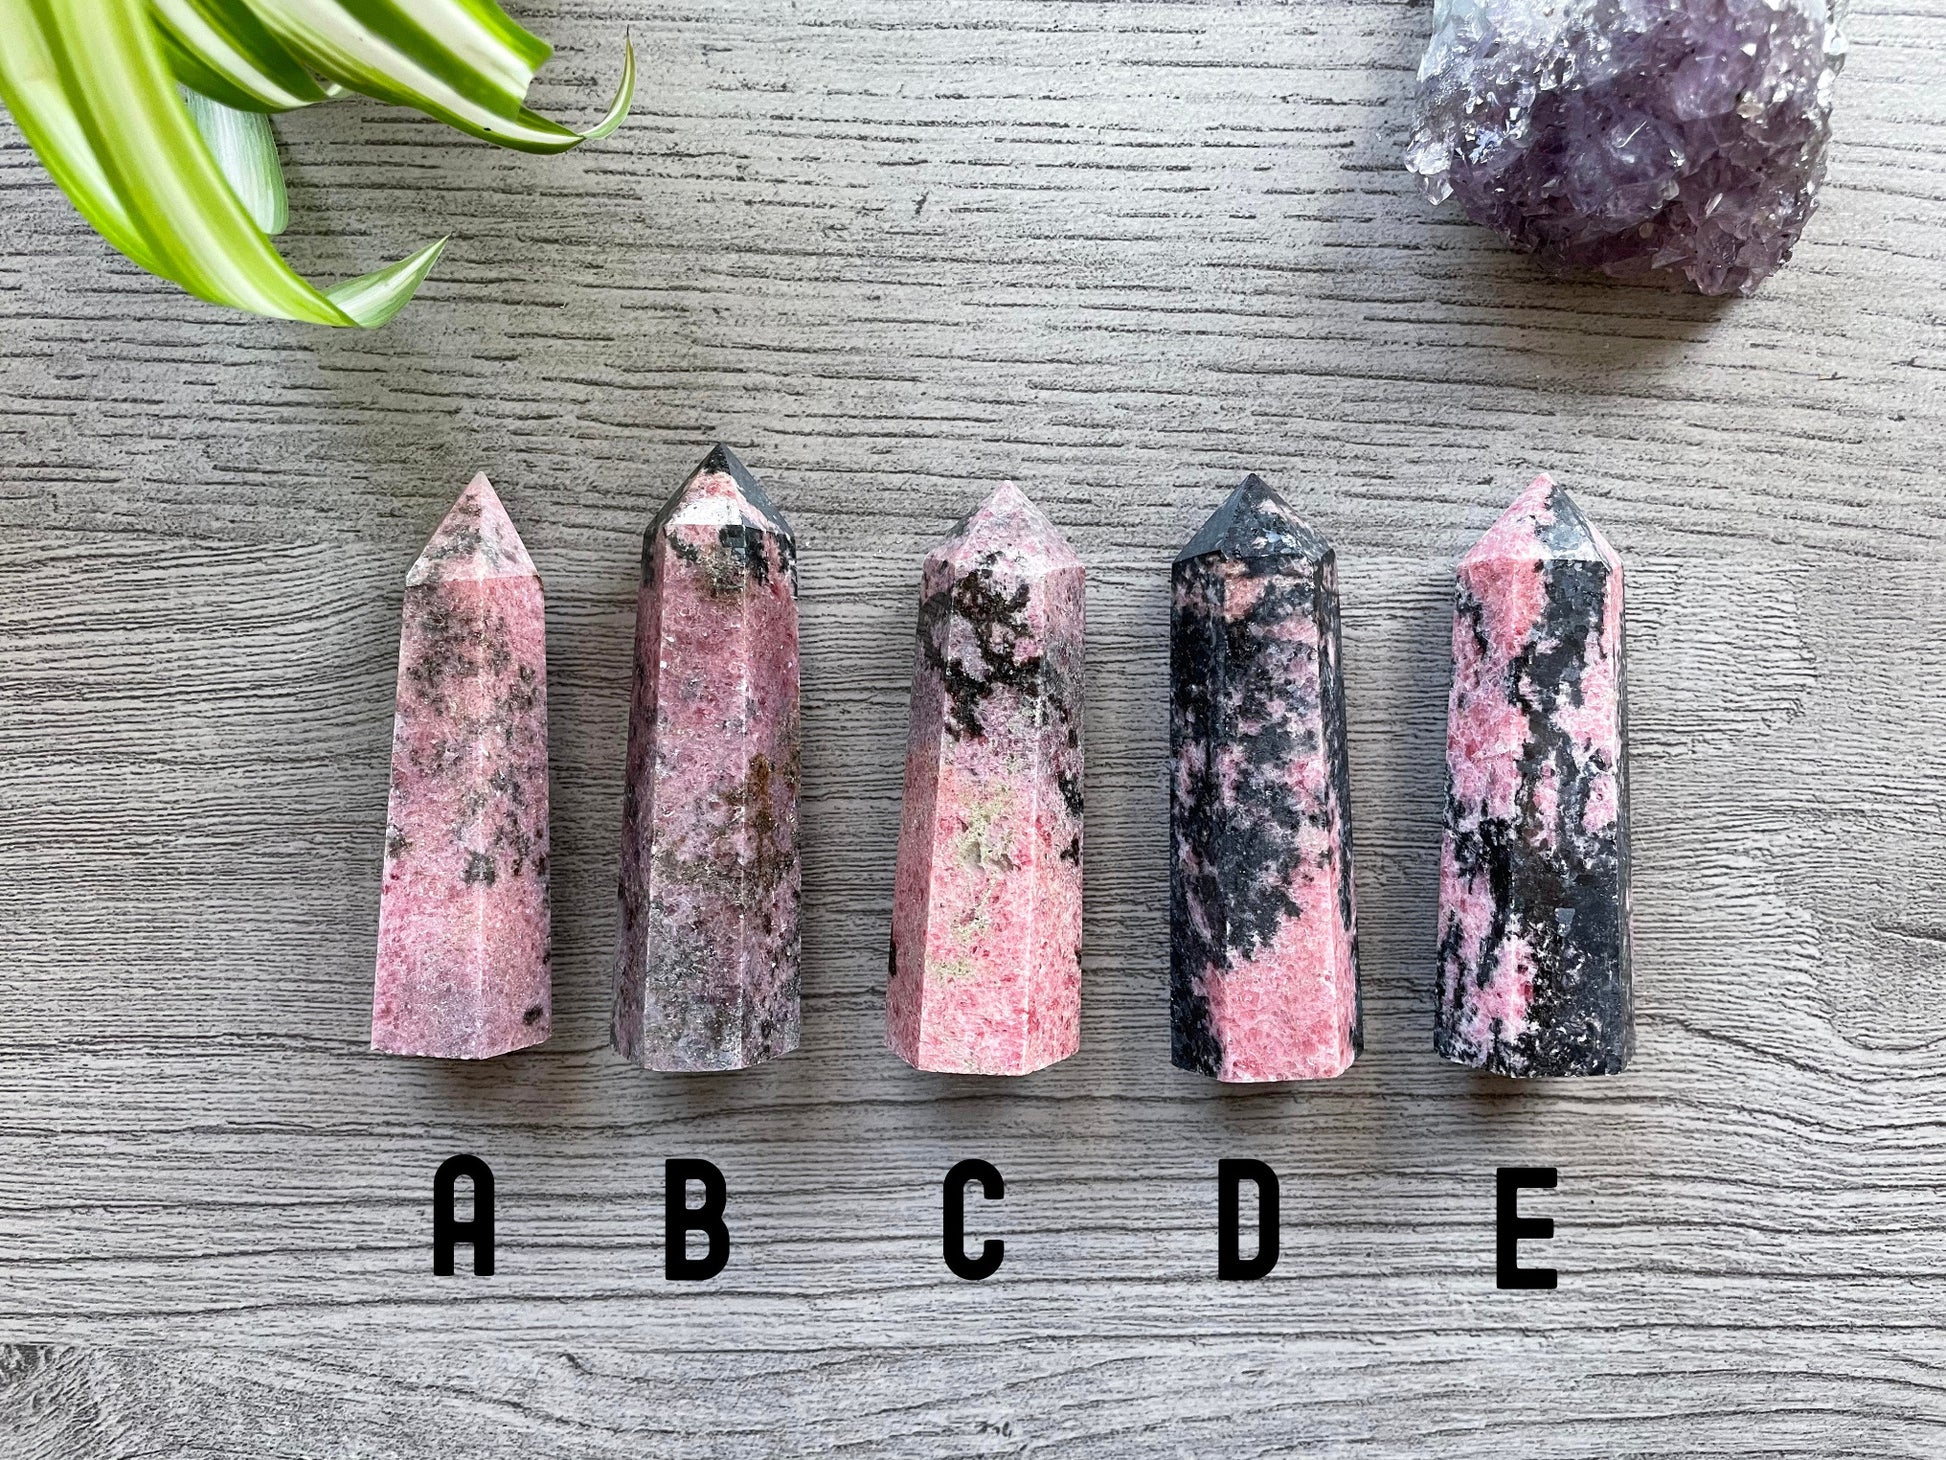 Pictured are various points of rhodonite.